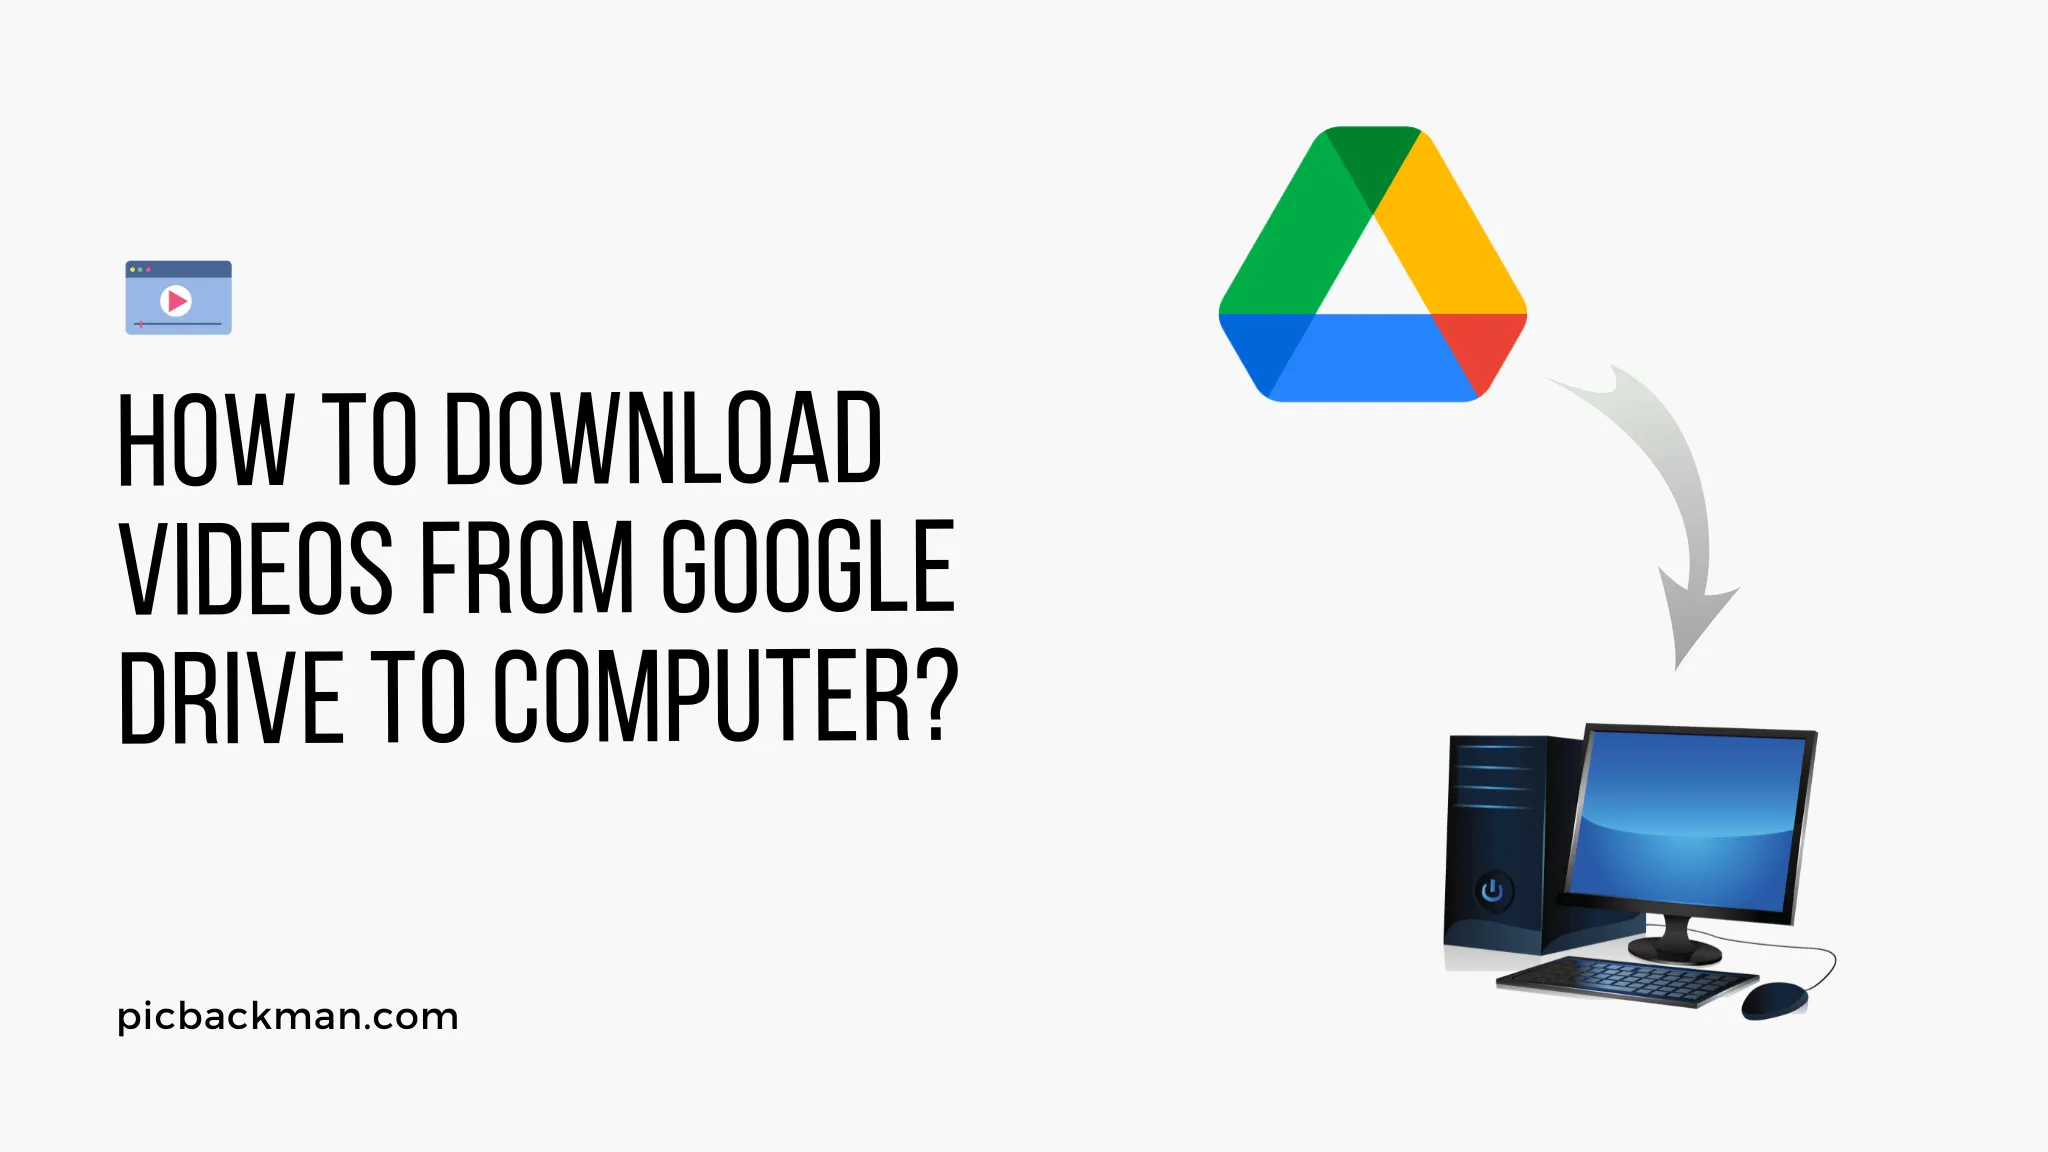 How to Download Videos from Google Drive to Computer?